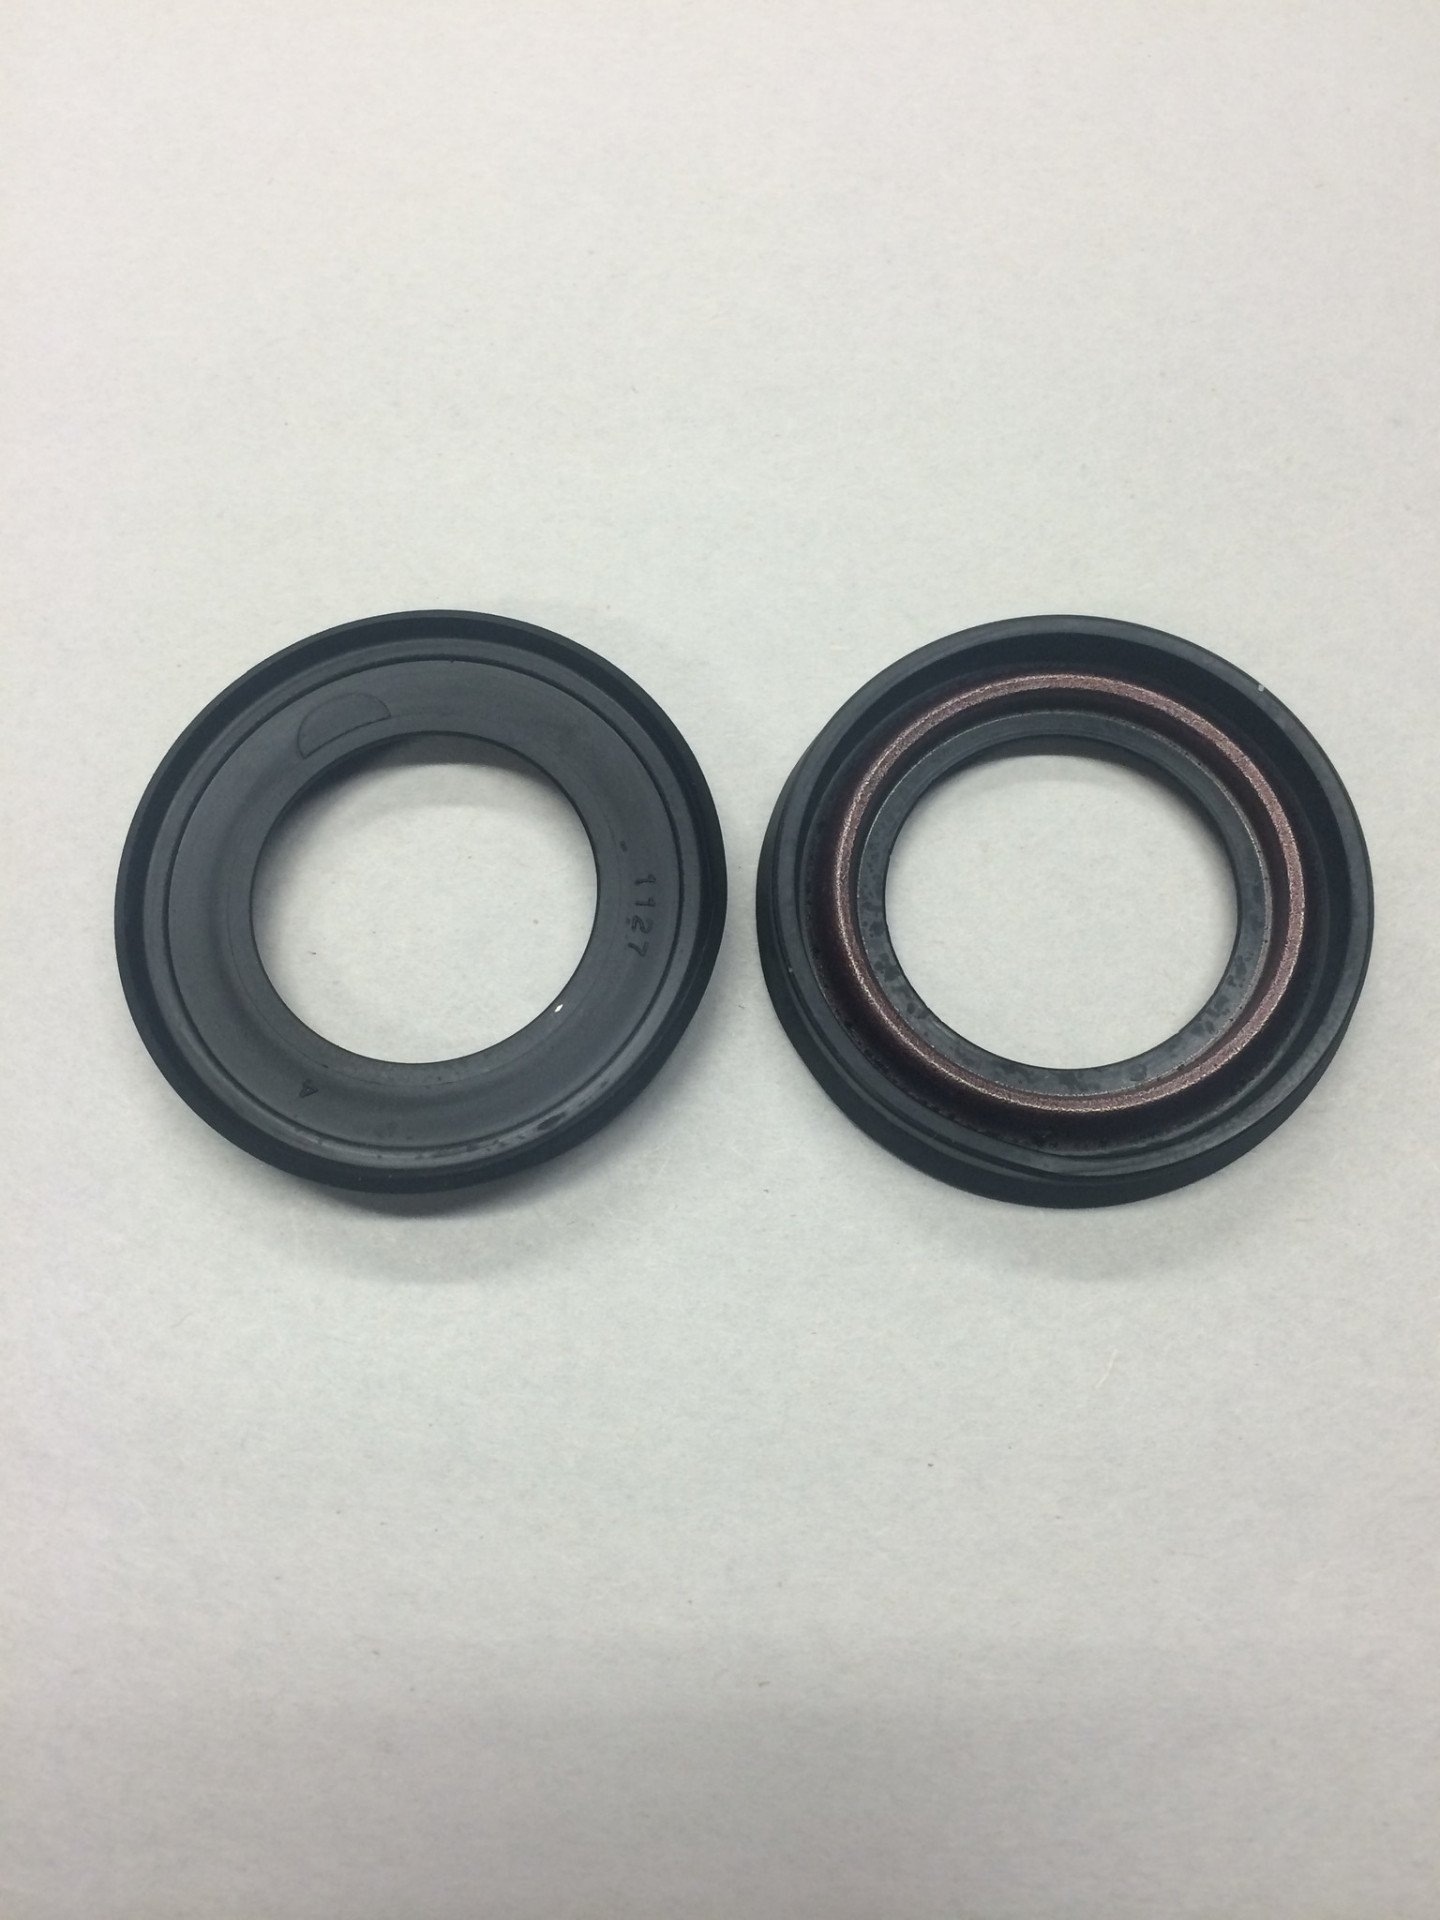 STEERING BEARING SEALS OIL IN FRAME T140 T120 1971 AND UP-TRIUMPH